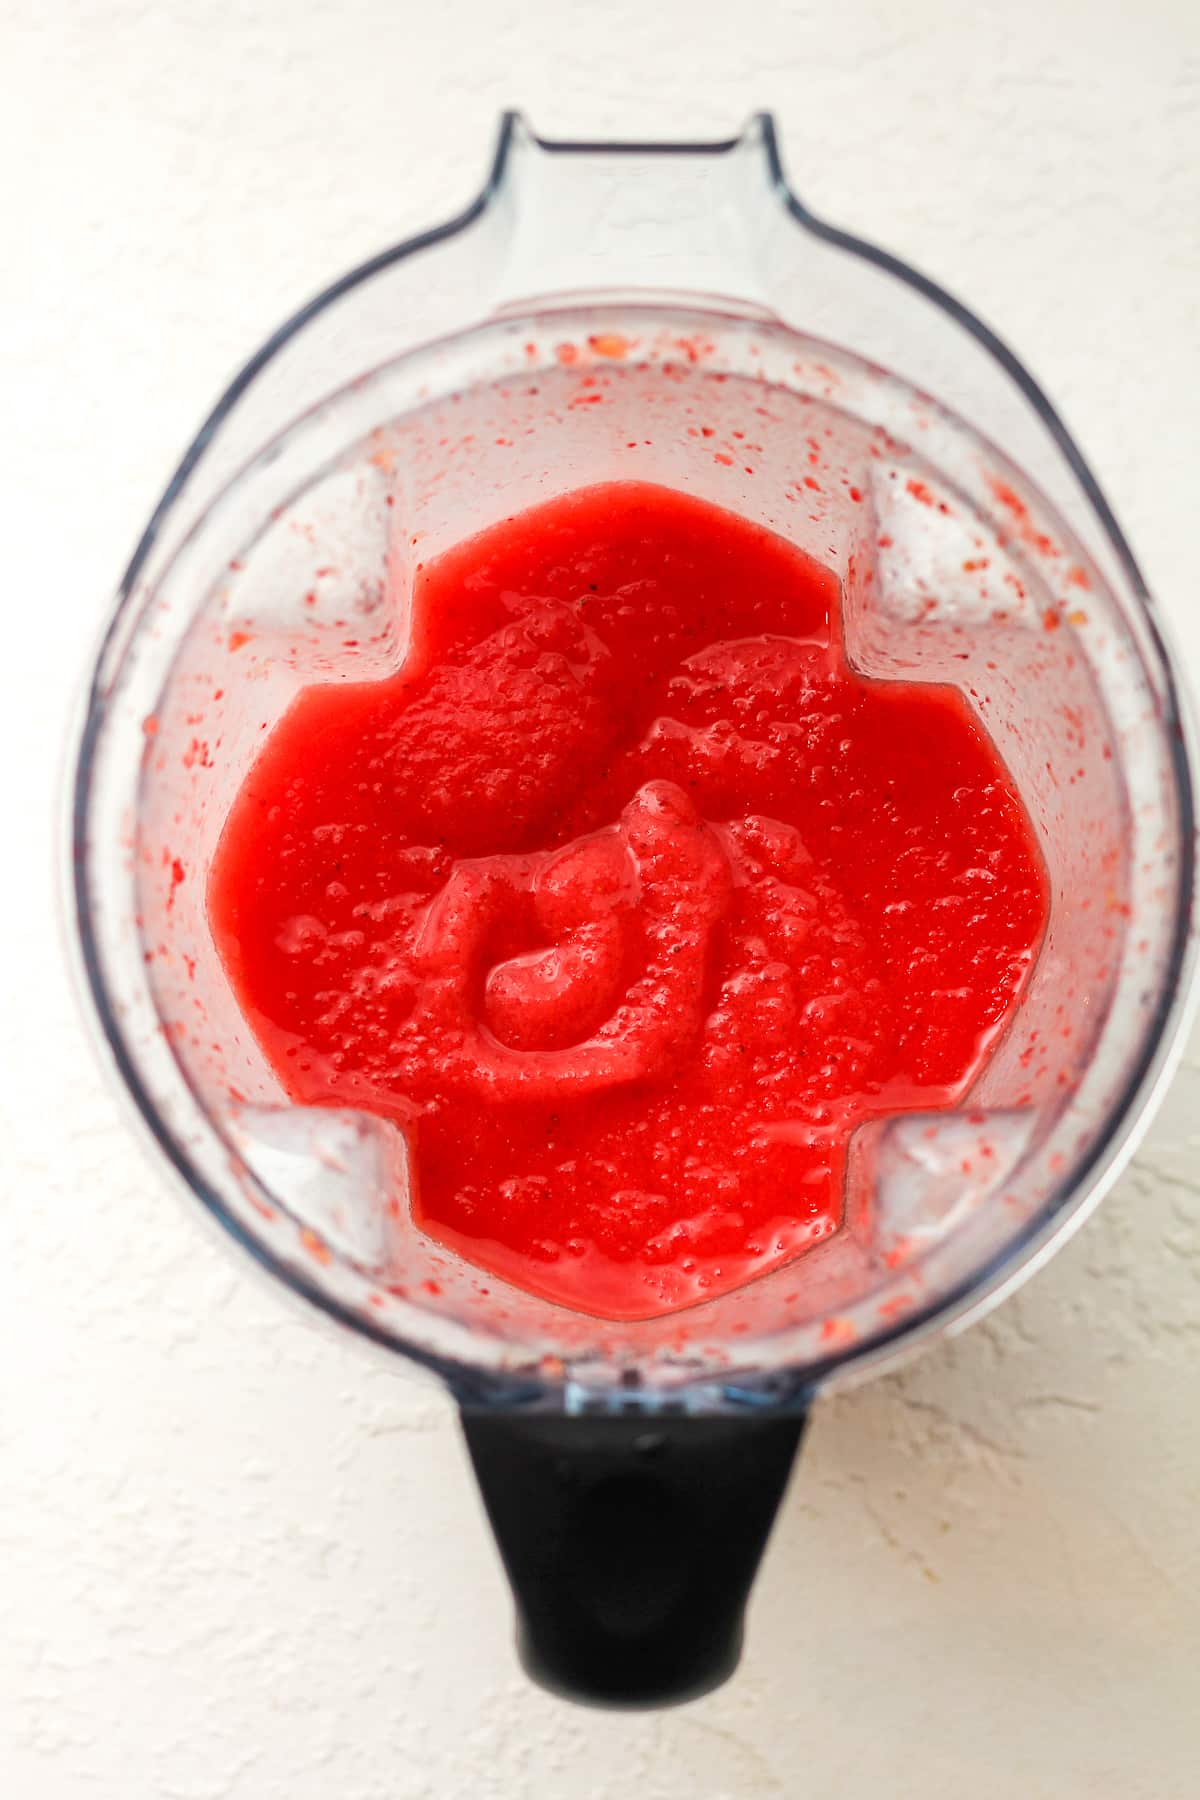 A blender of pureed strawberry margaritas.